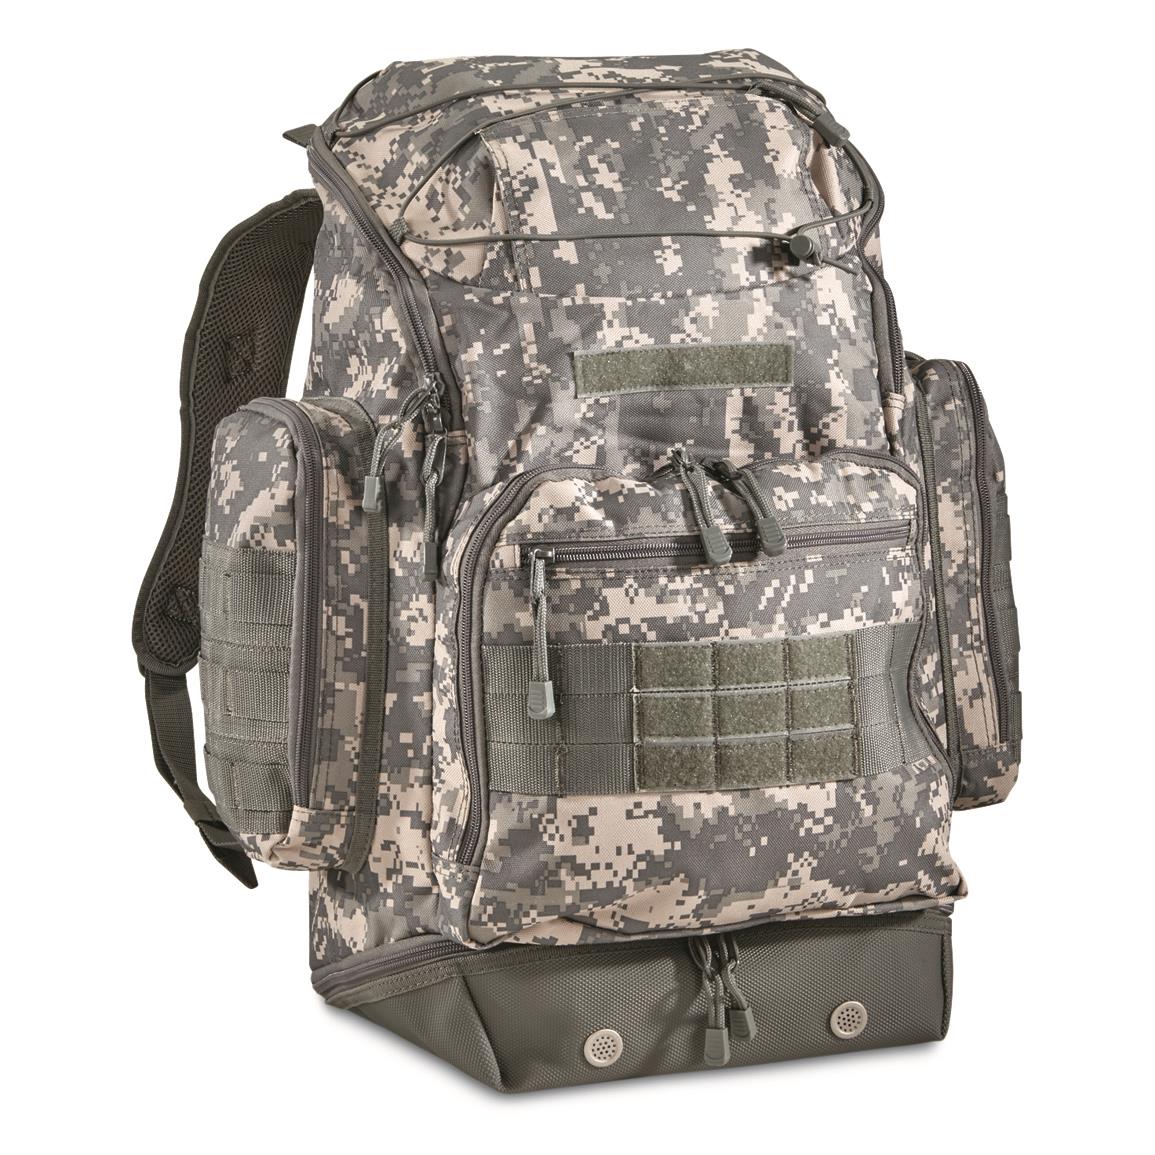 MOLLE compatible for adding more pouches and gear, ACU